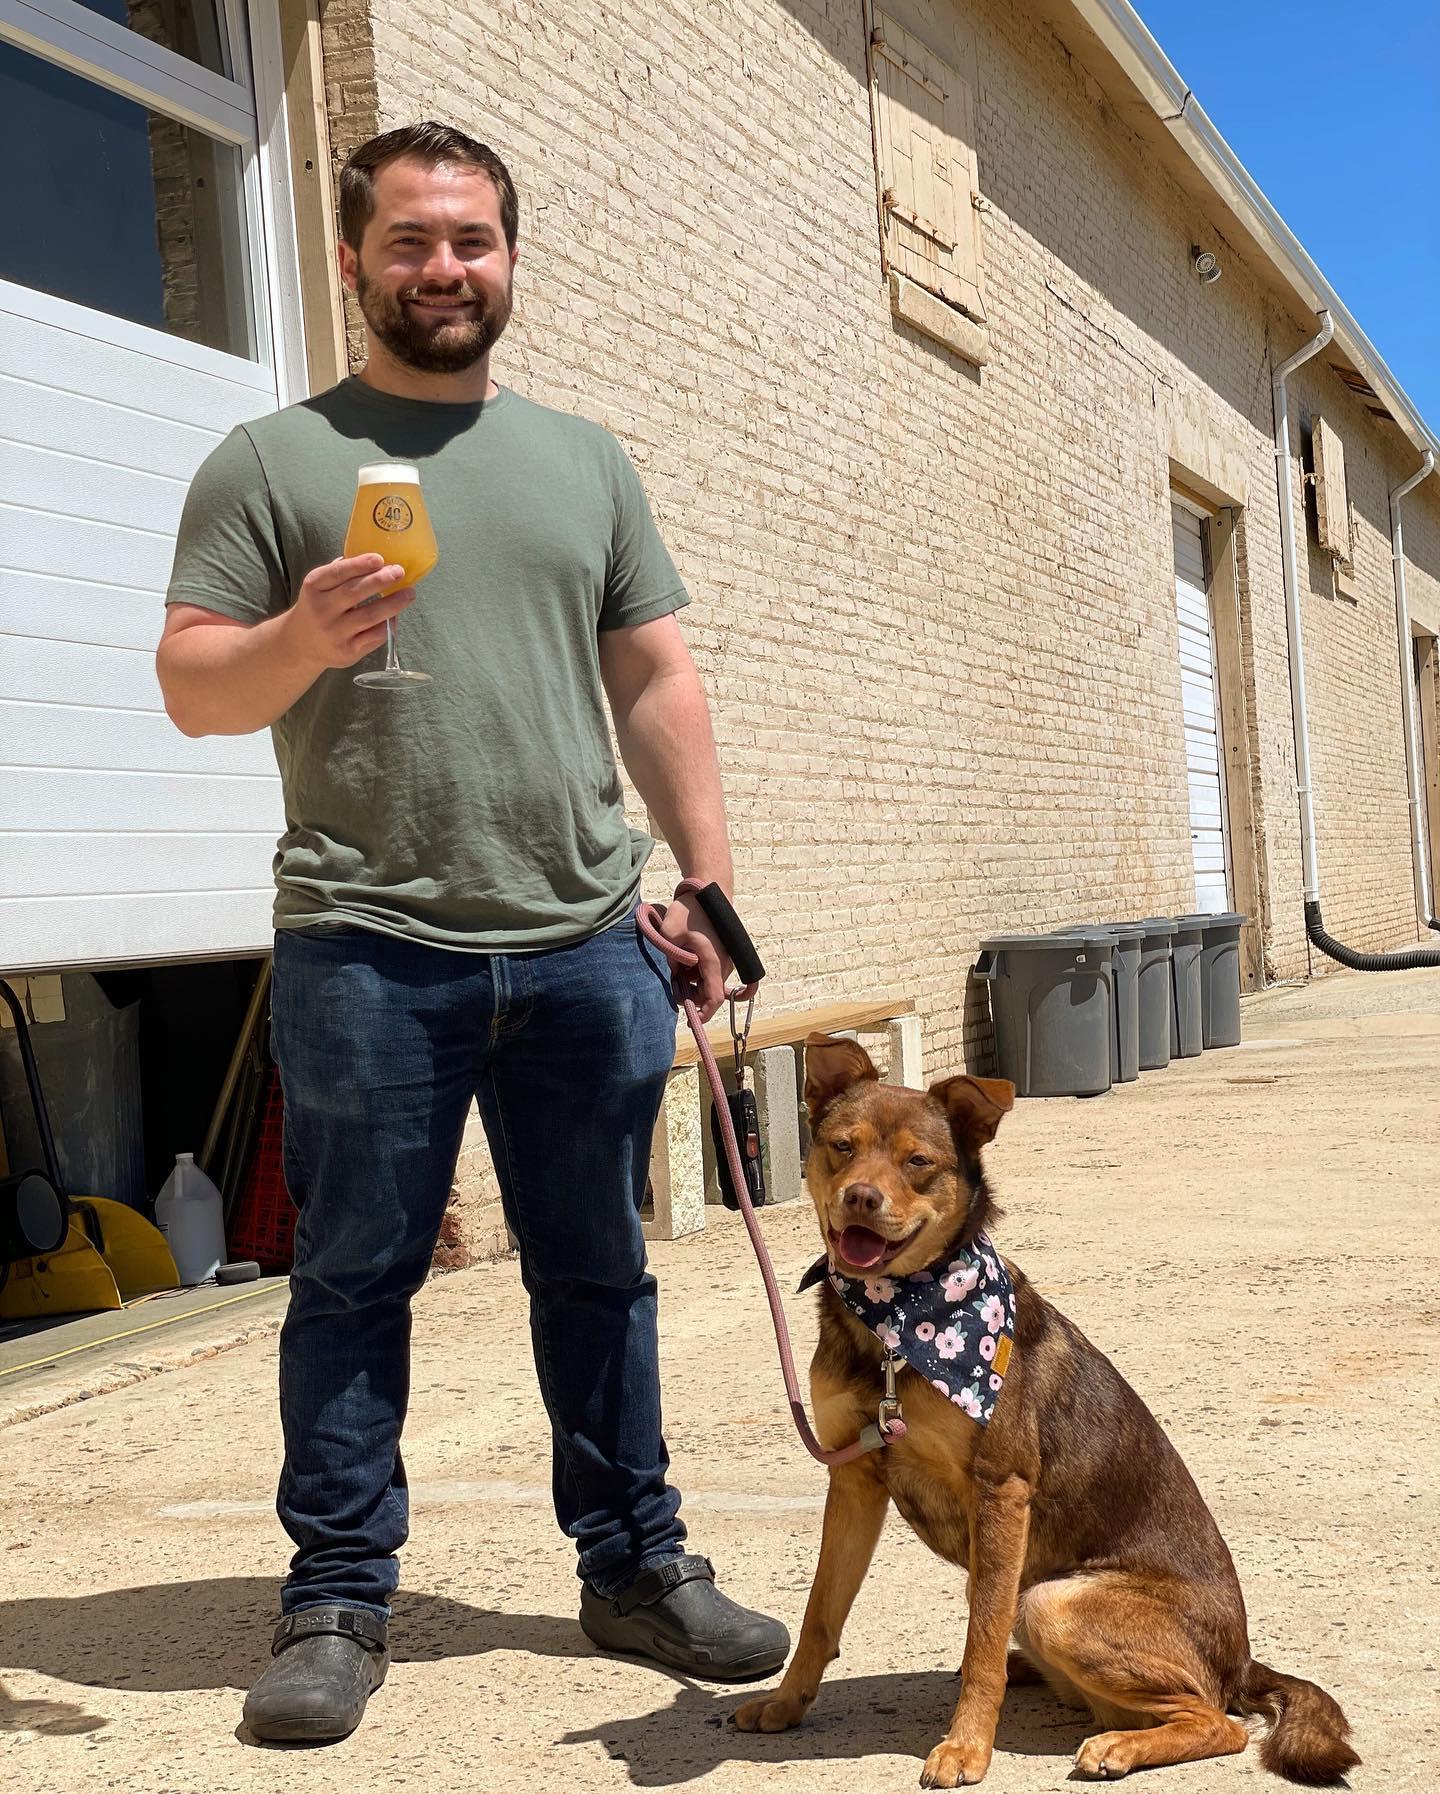 Pet Friendly South 40 Brewing Co.